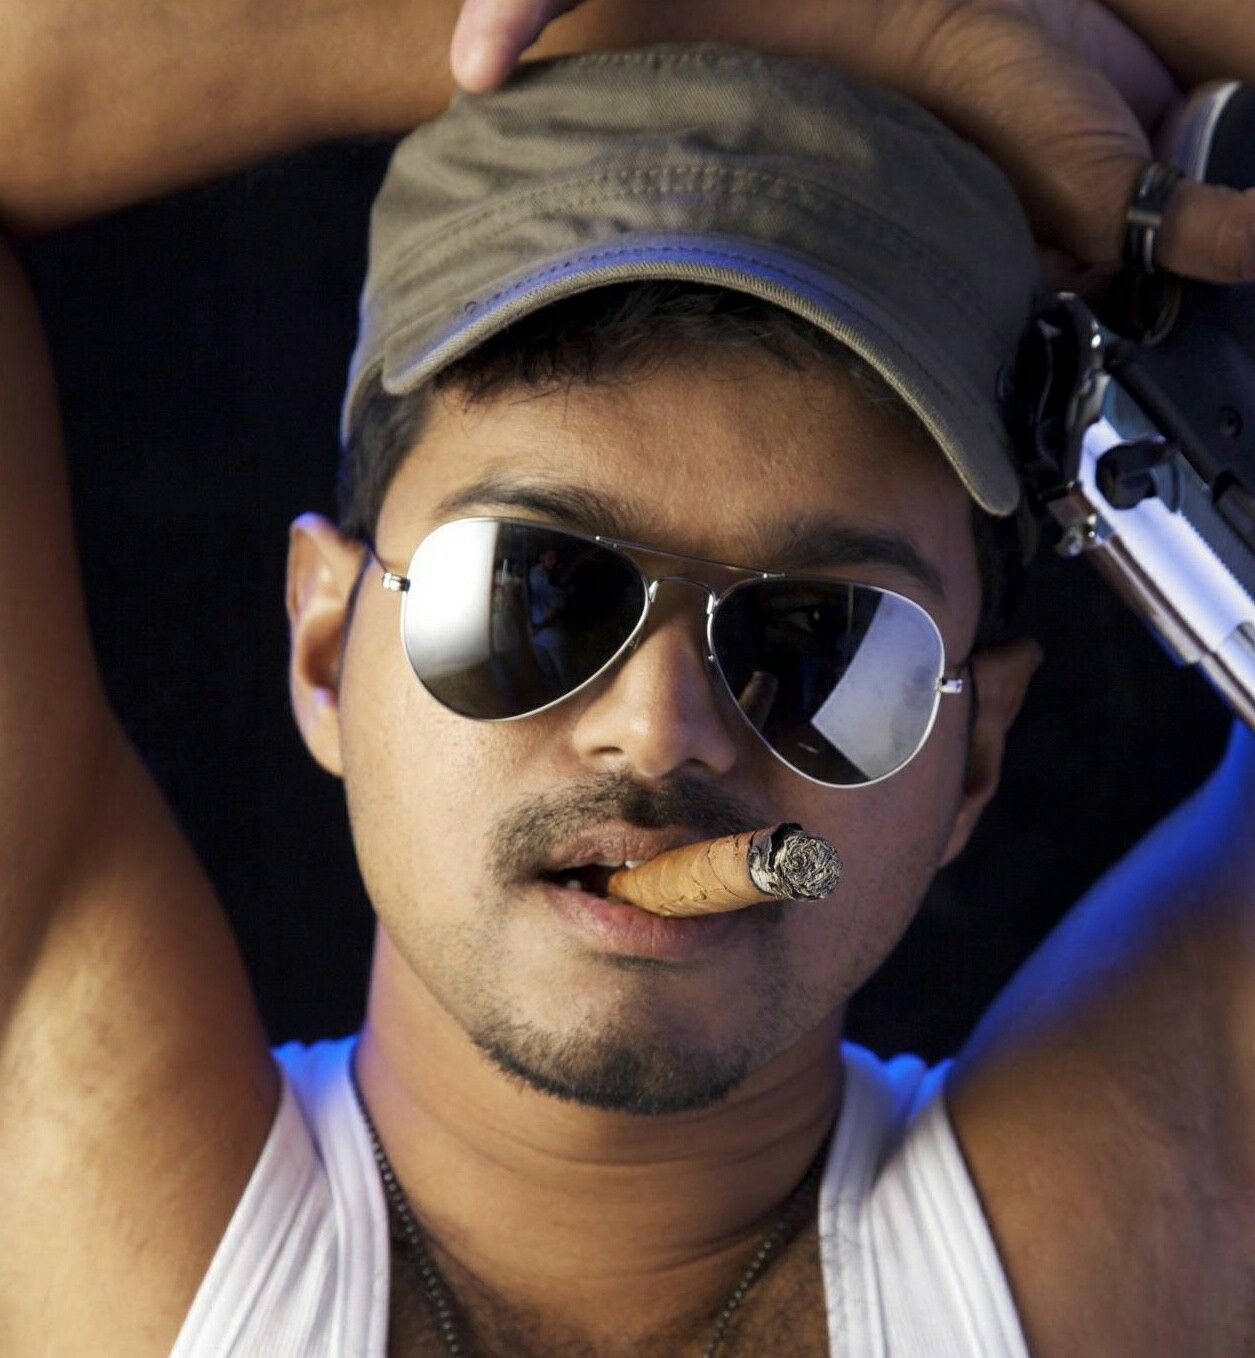 Thalapathyhd Gangster Look: Thalapathy I Hd-look Med Gangstervibbar. Wallpaper